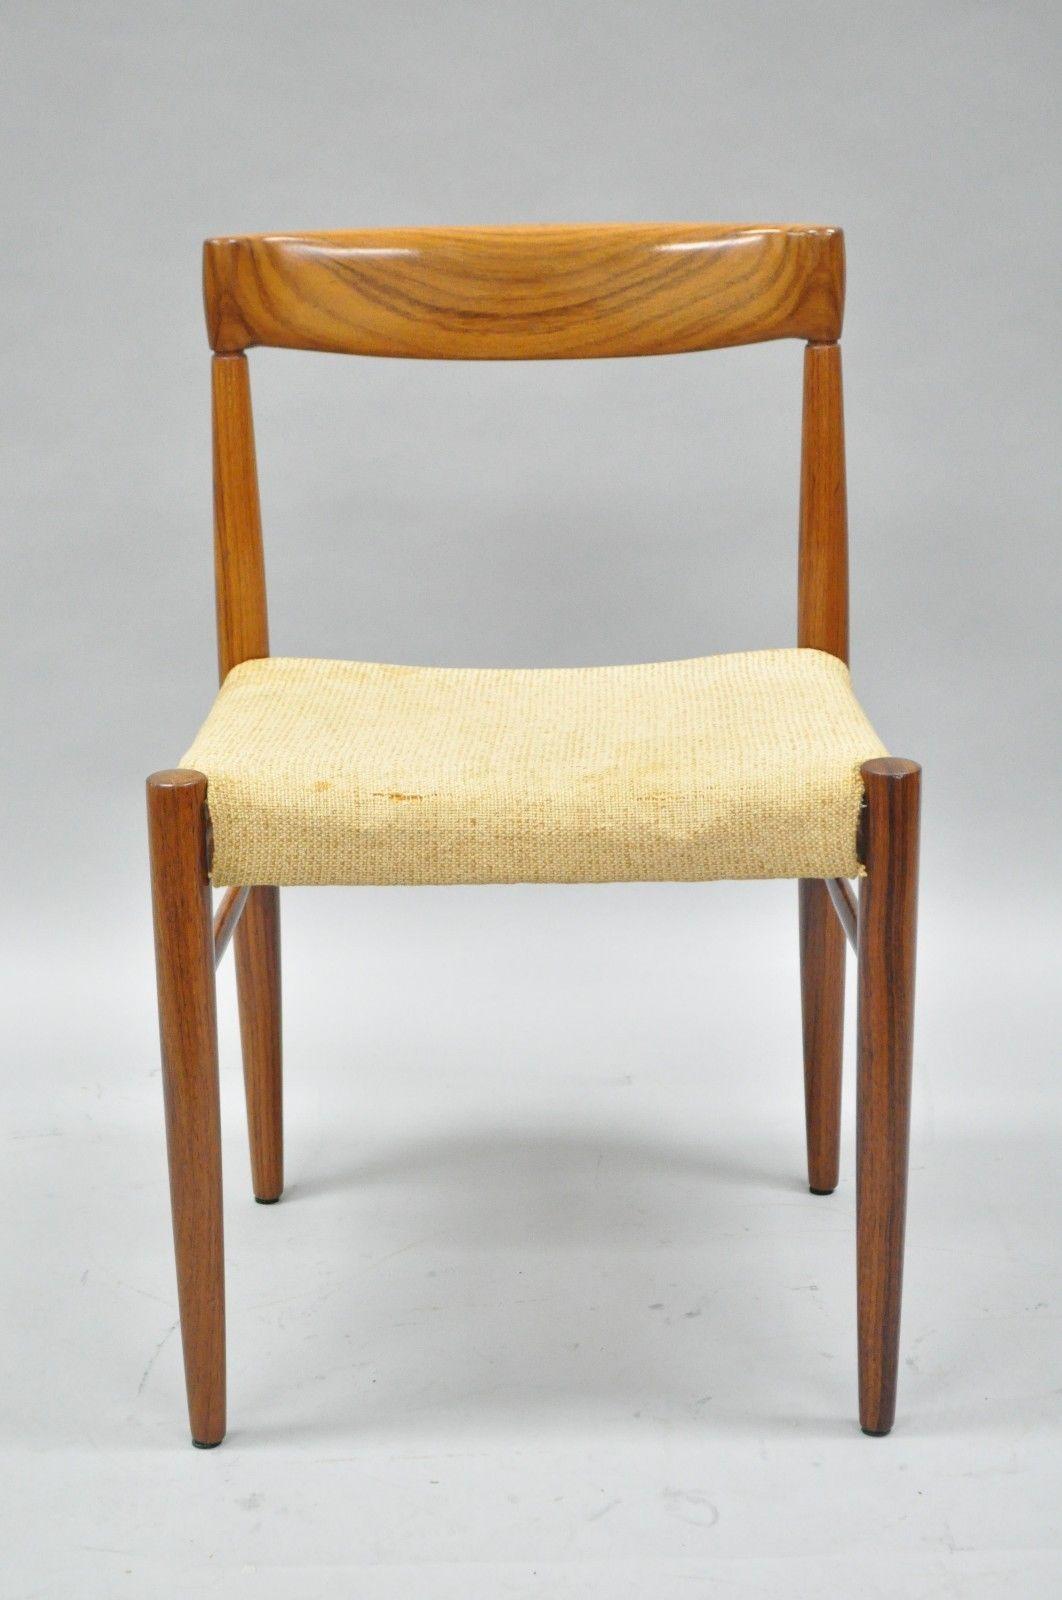 Vintage HW Klein for Bramin midcentury Danish Modern solid rosewood side chair. Item features sculptural lipped back, clean modernist design, solid rosewood construction, beautiful wood grain, stamped ?12730, European, circa mid-20th century.